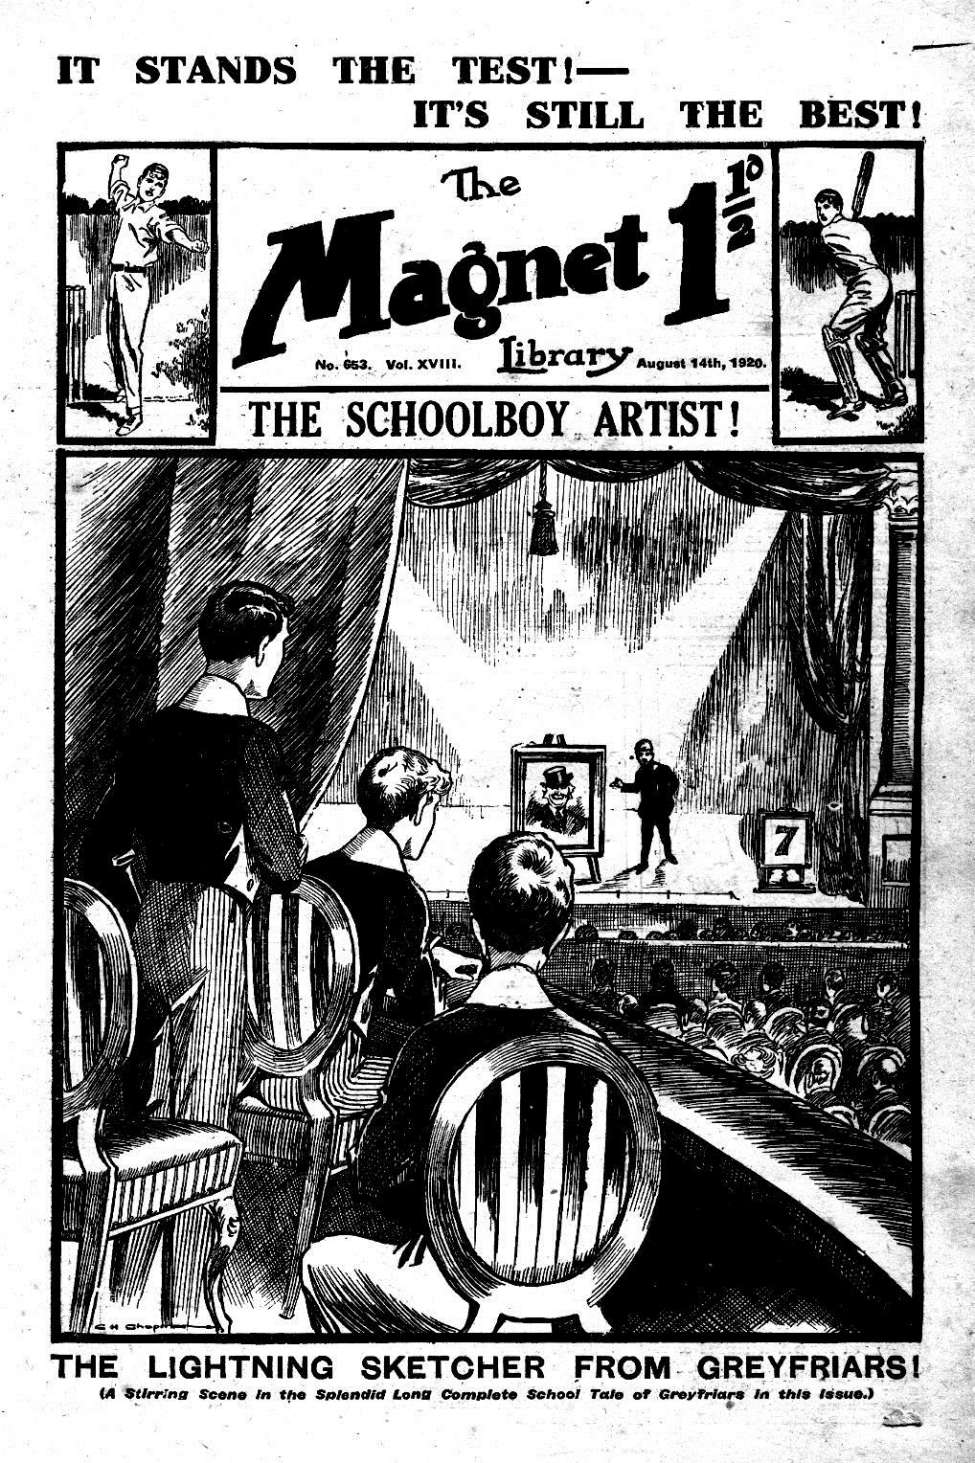 Book Cover For The Magnet 653 - The Schoolboy Artist